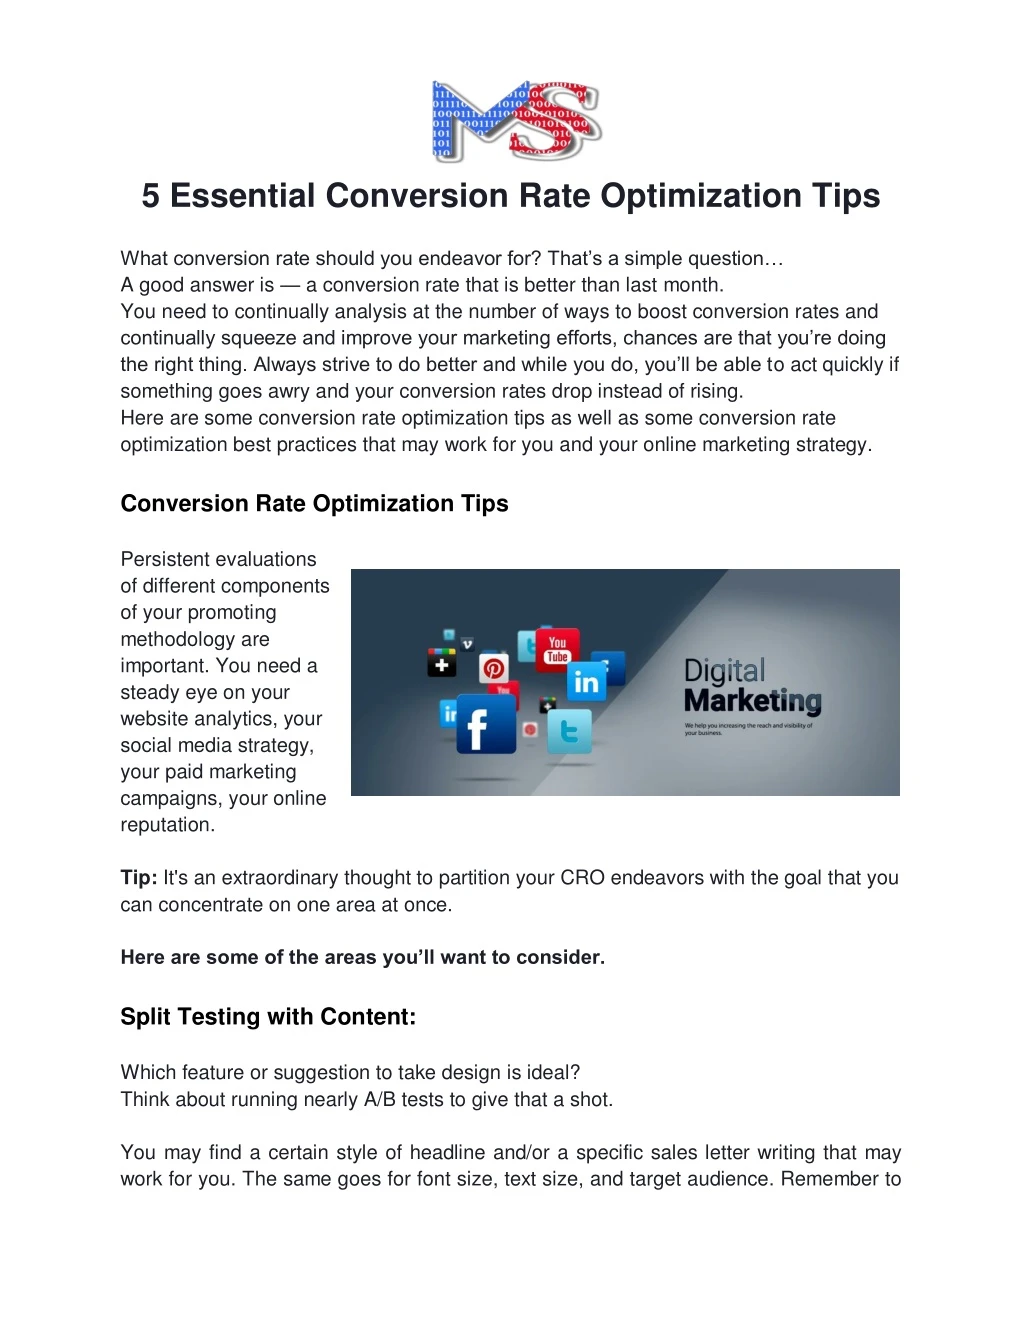 5 essential conversion rate optimization tips